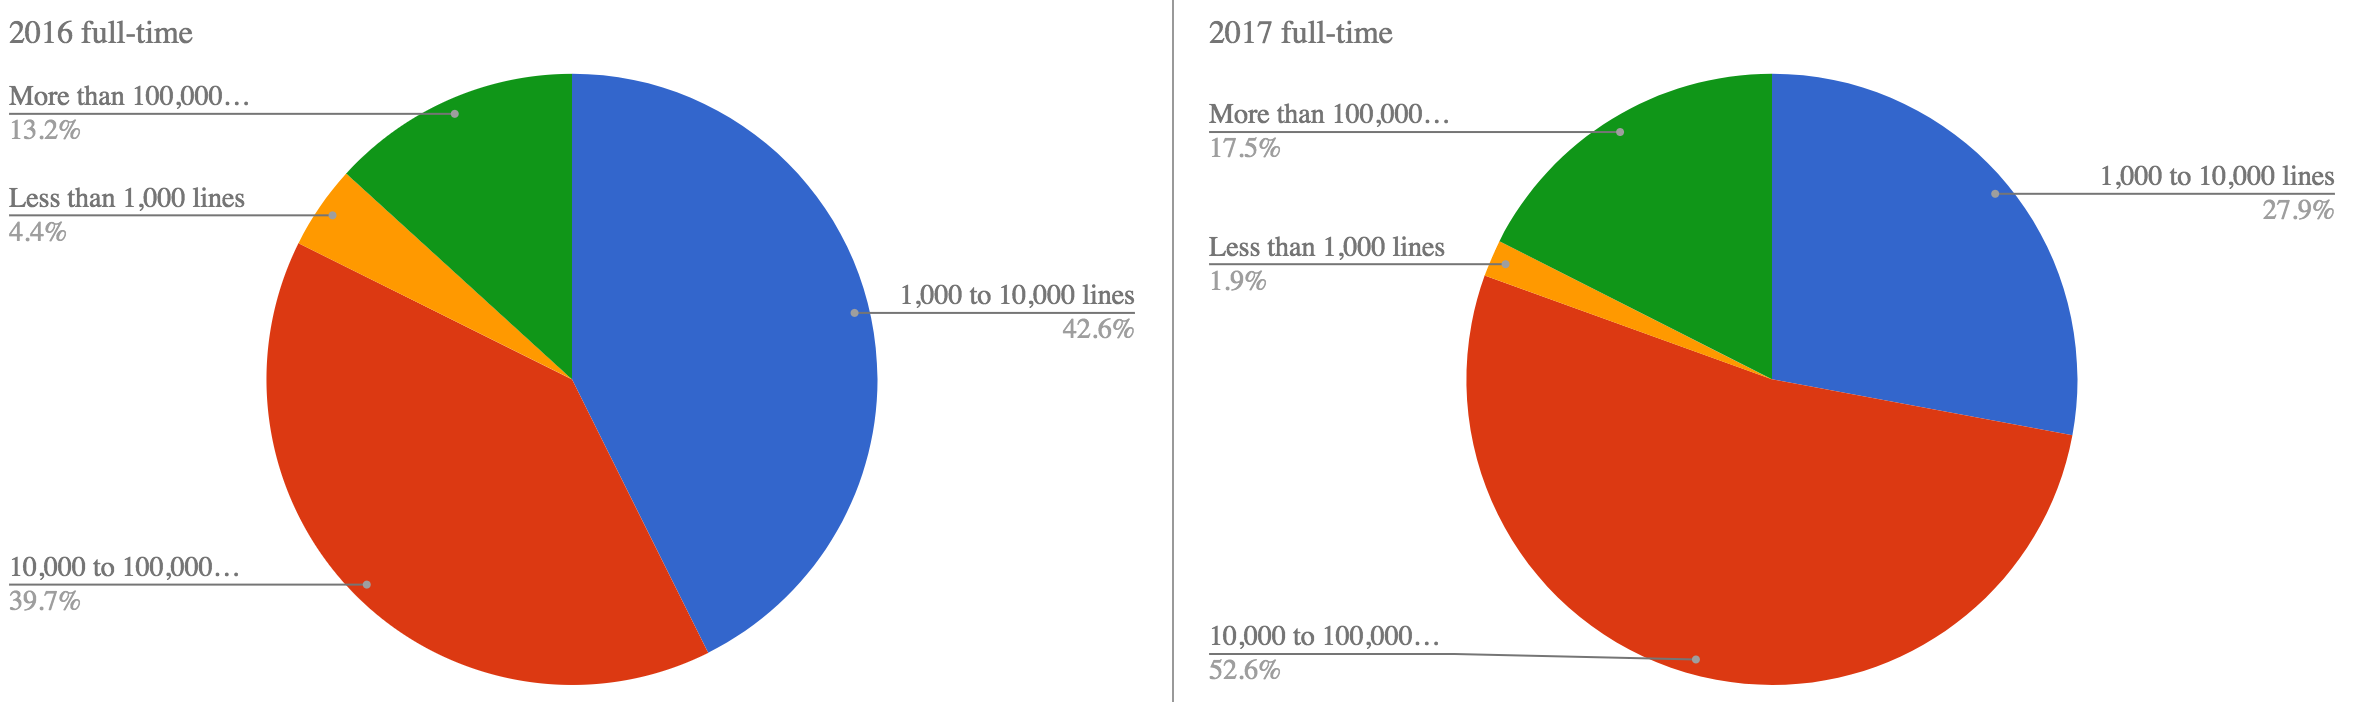 Two charts full-time: 2016: 4.4% less than 1000 lines, 42.6% 1000 to 10000 lines, 39.7% 10000 to 100000 lines, 13.2% more than 100000 lines. 2017: 1.9% less than 1000 lines, 27.9% 1000 to 10000 lines, 52.6% 10000 to 100000 lines, 17.5% more than 100000 lines